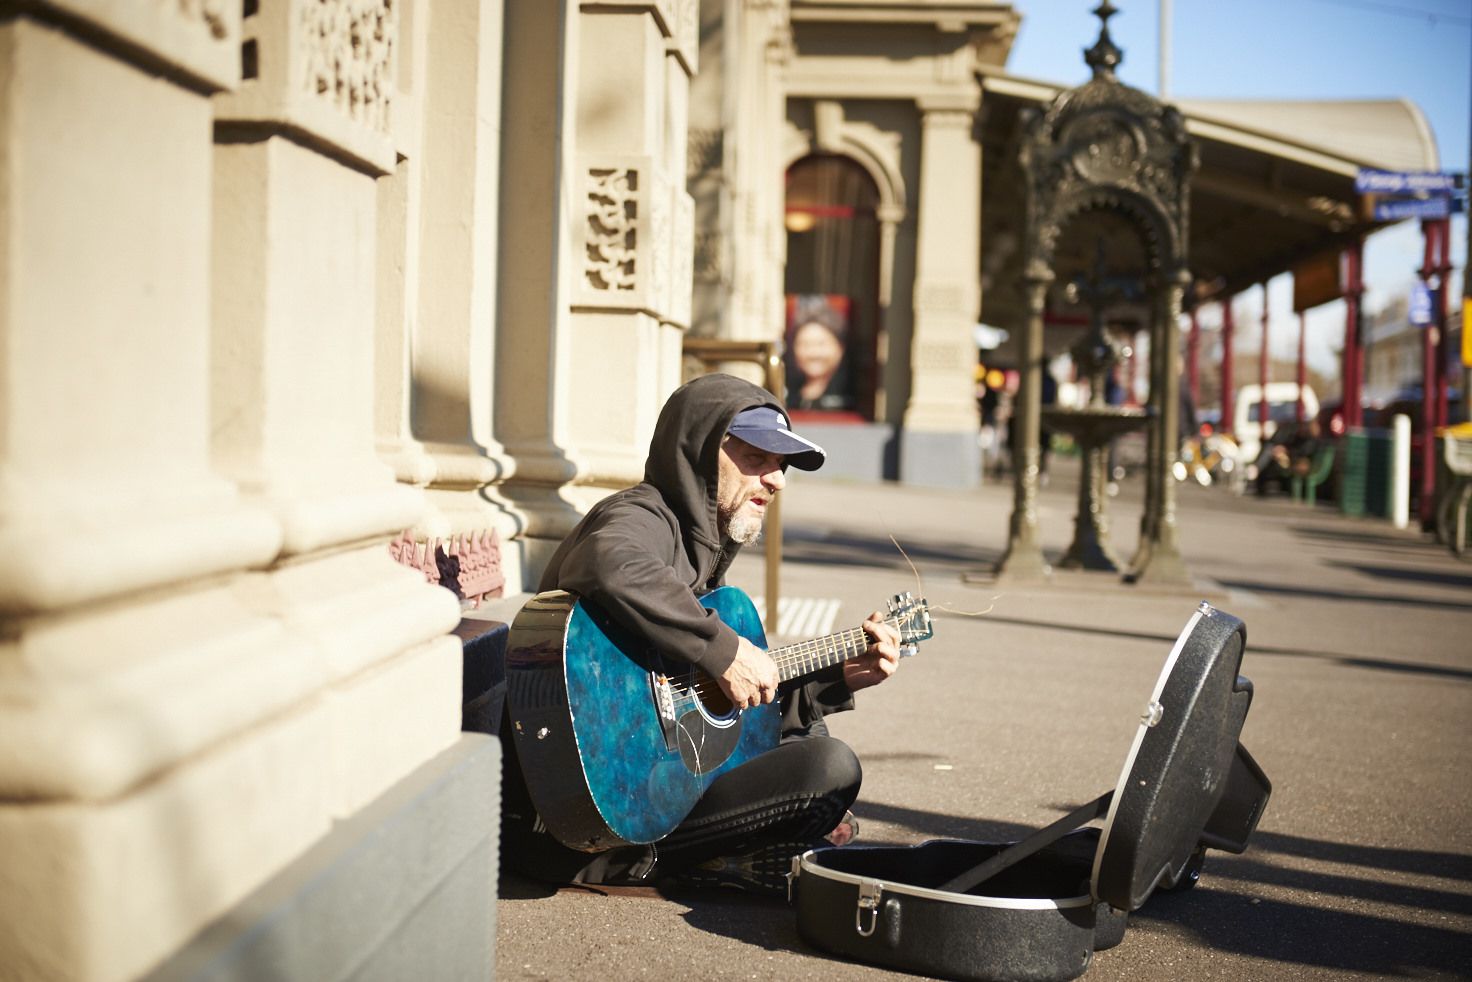 Homeless person busking